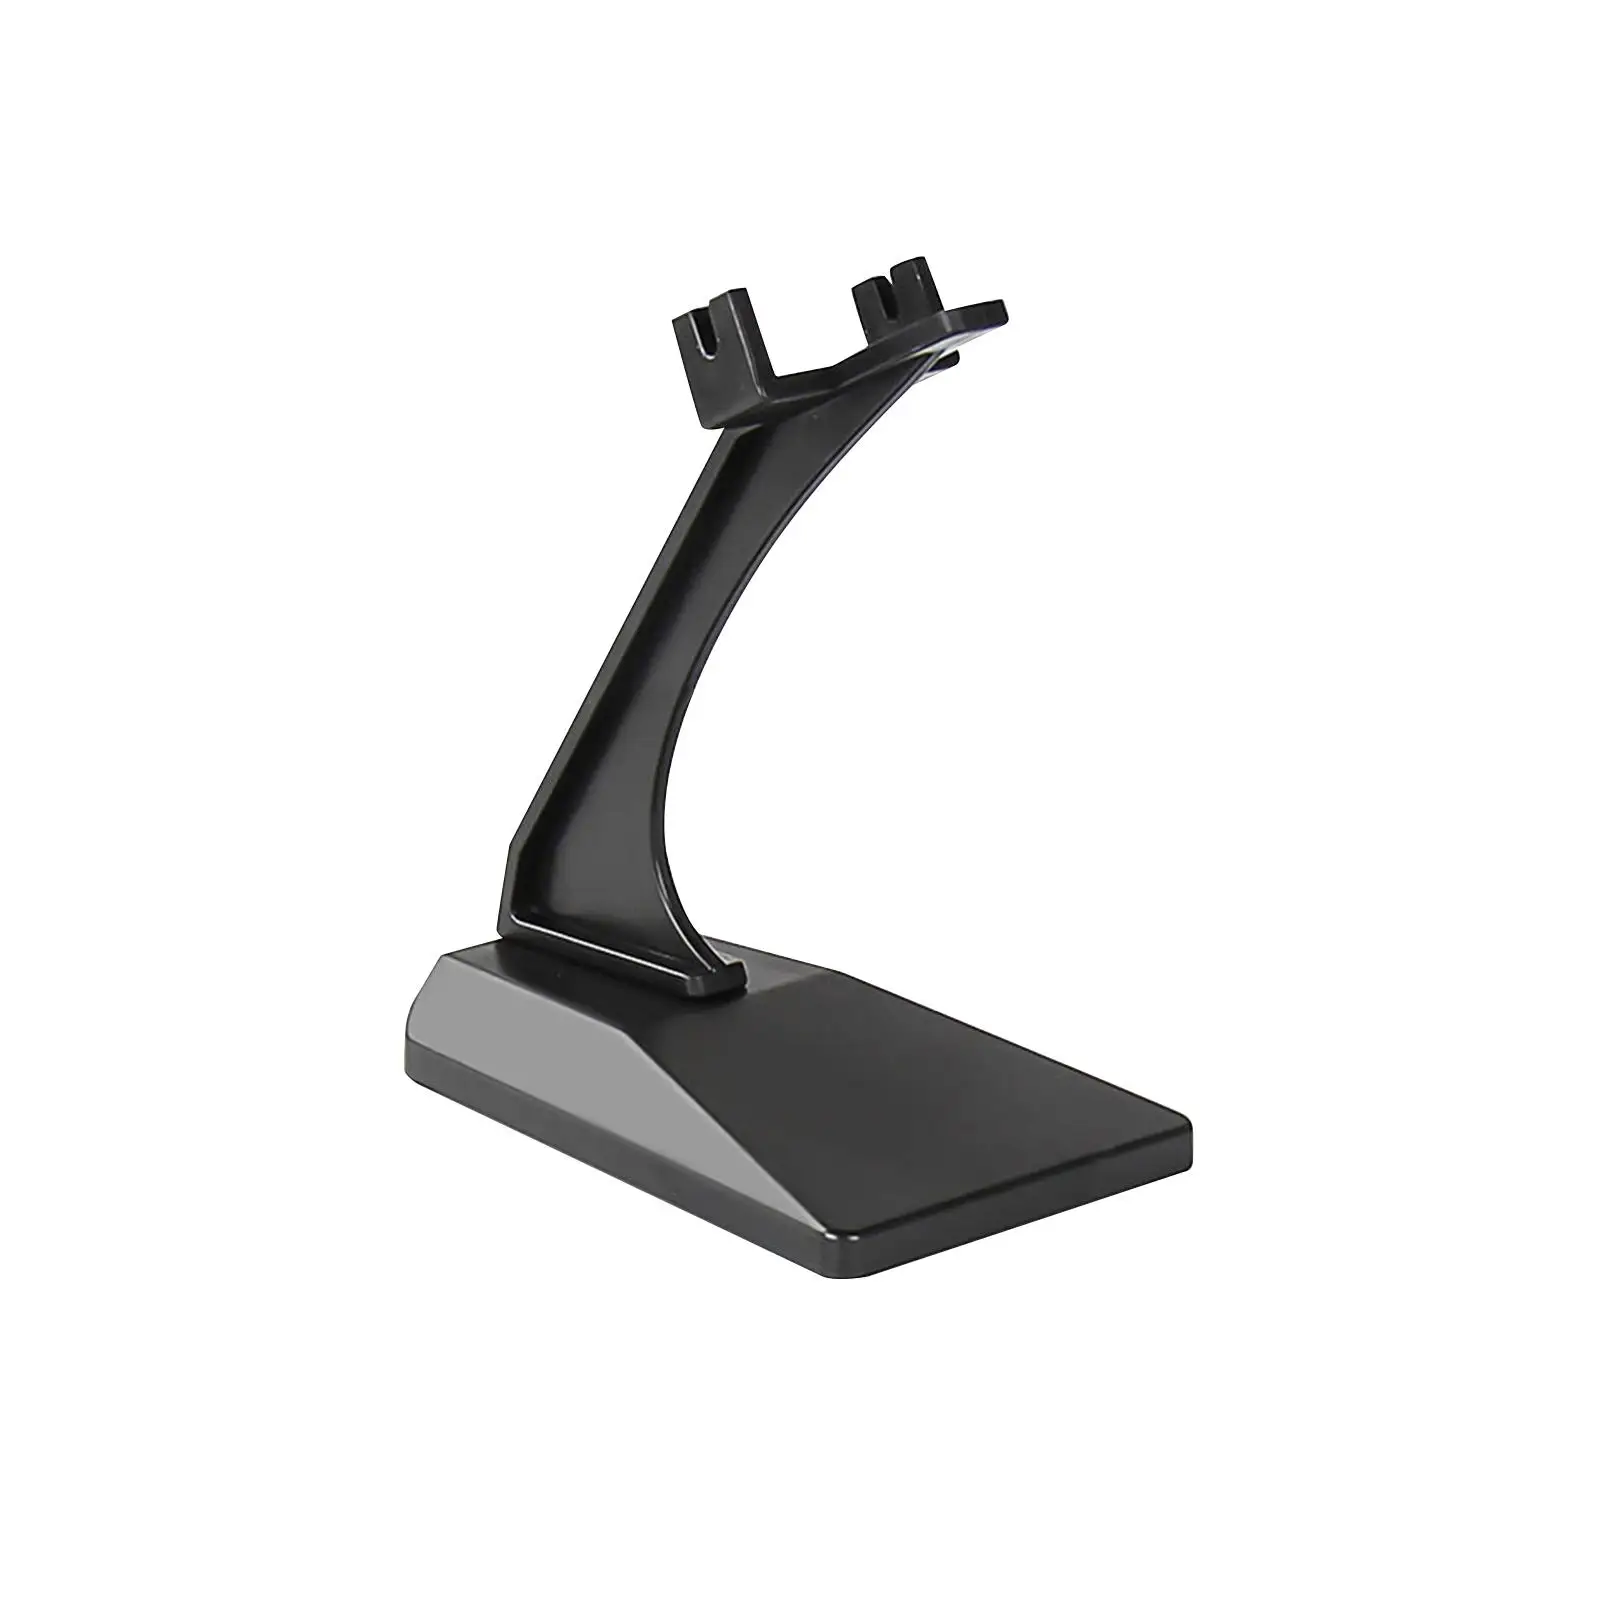 Aircraft Display Stand Universal Easel Holder for Aircraft Model